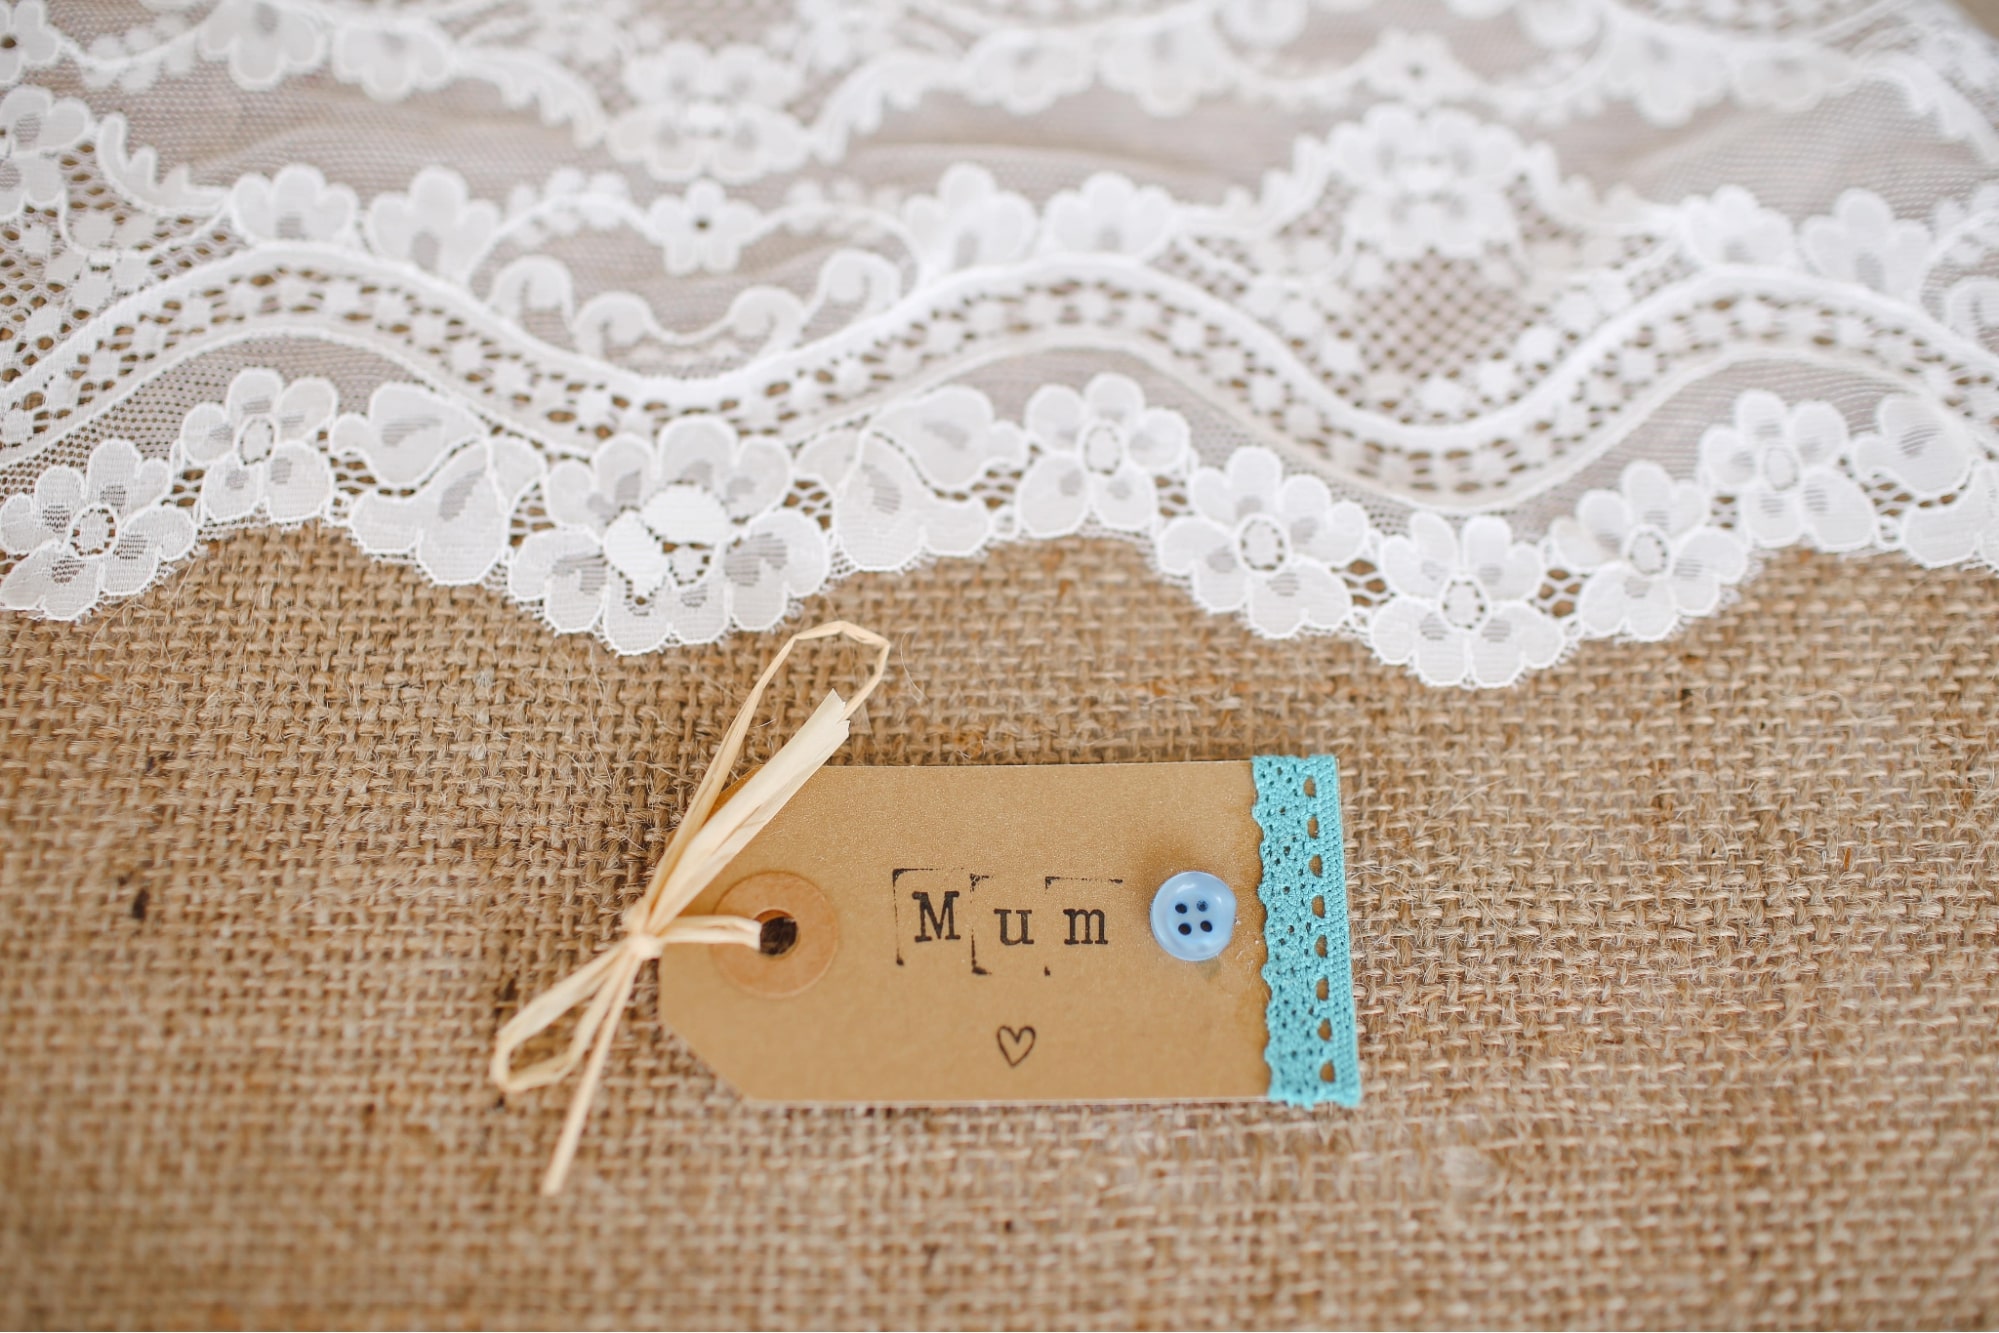 A handmade gift tag for a Mother’s Day gift sits on a burlap runner with white lace